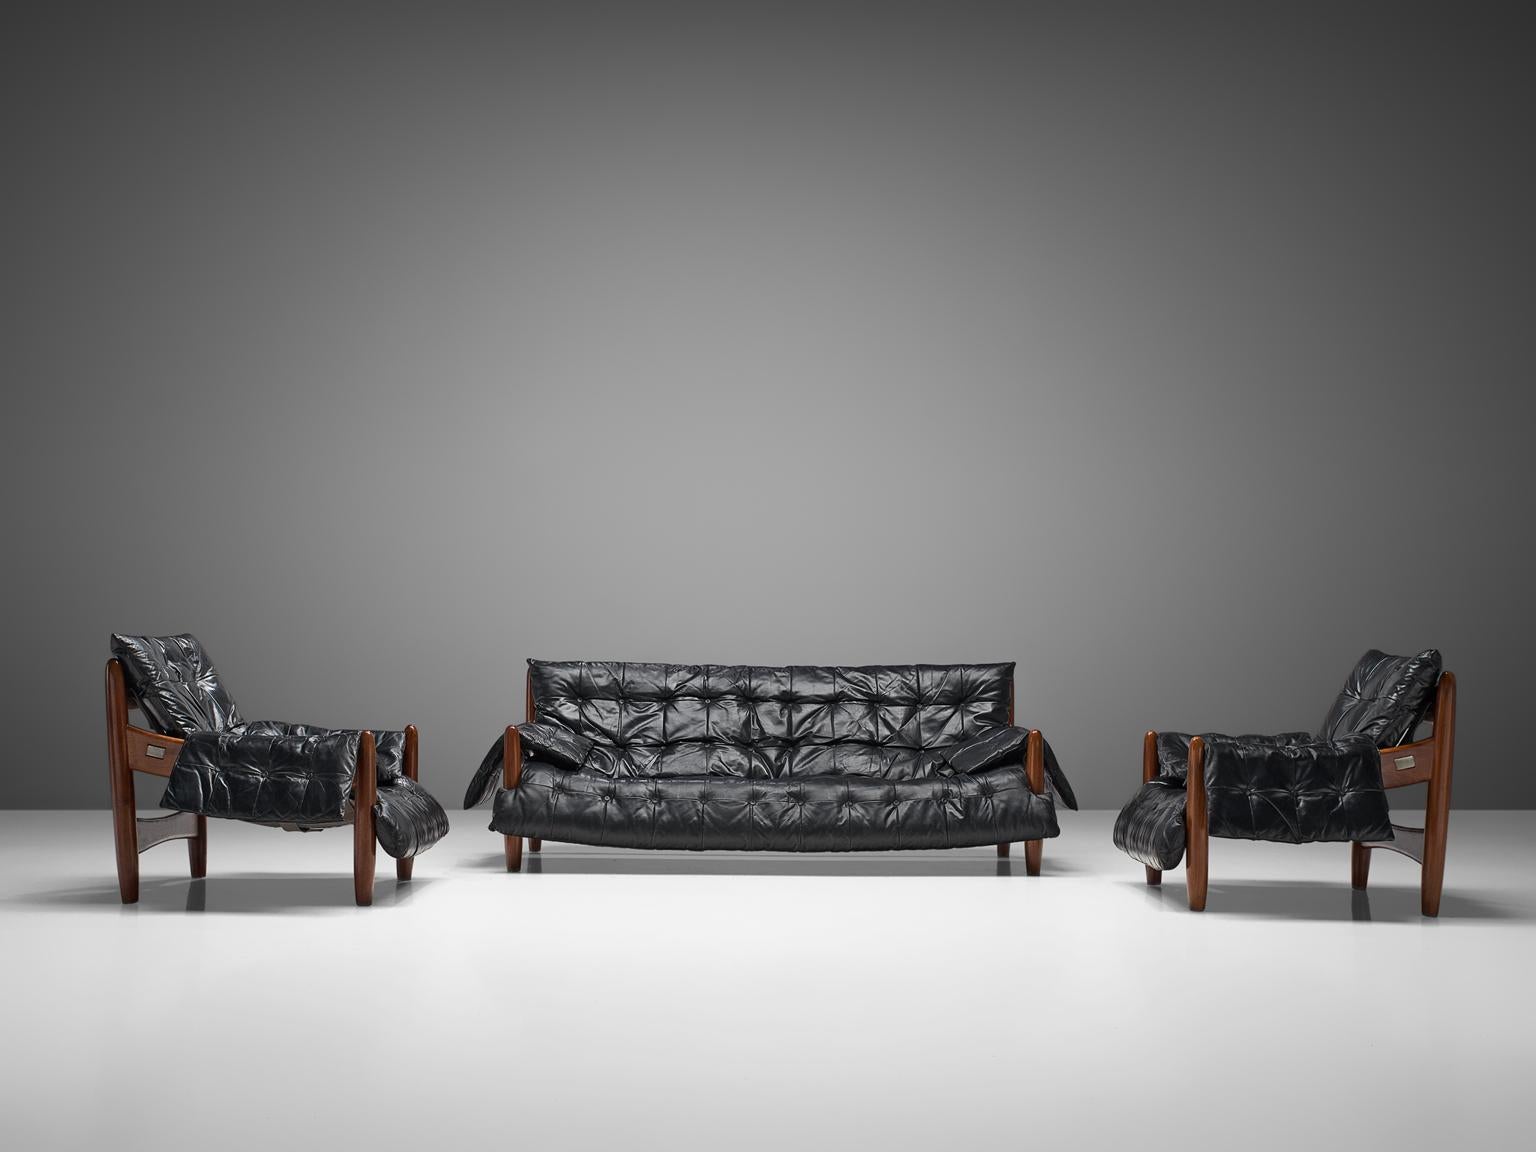 Sergio Rodrigues, 'Sheriff' sofa, black leather and Brazilian hardwood, Brazil, 1960s

Comfortable and extravagant living room set by Brazilian designer Sergio Rodrigues. These sofa and lounge chairs breath the characteristics of Brazilian modern